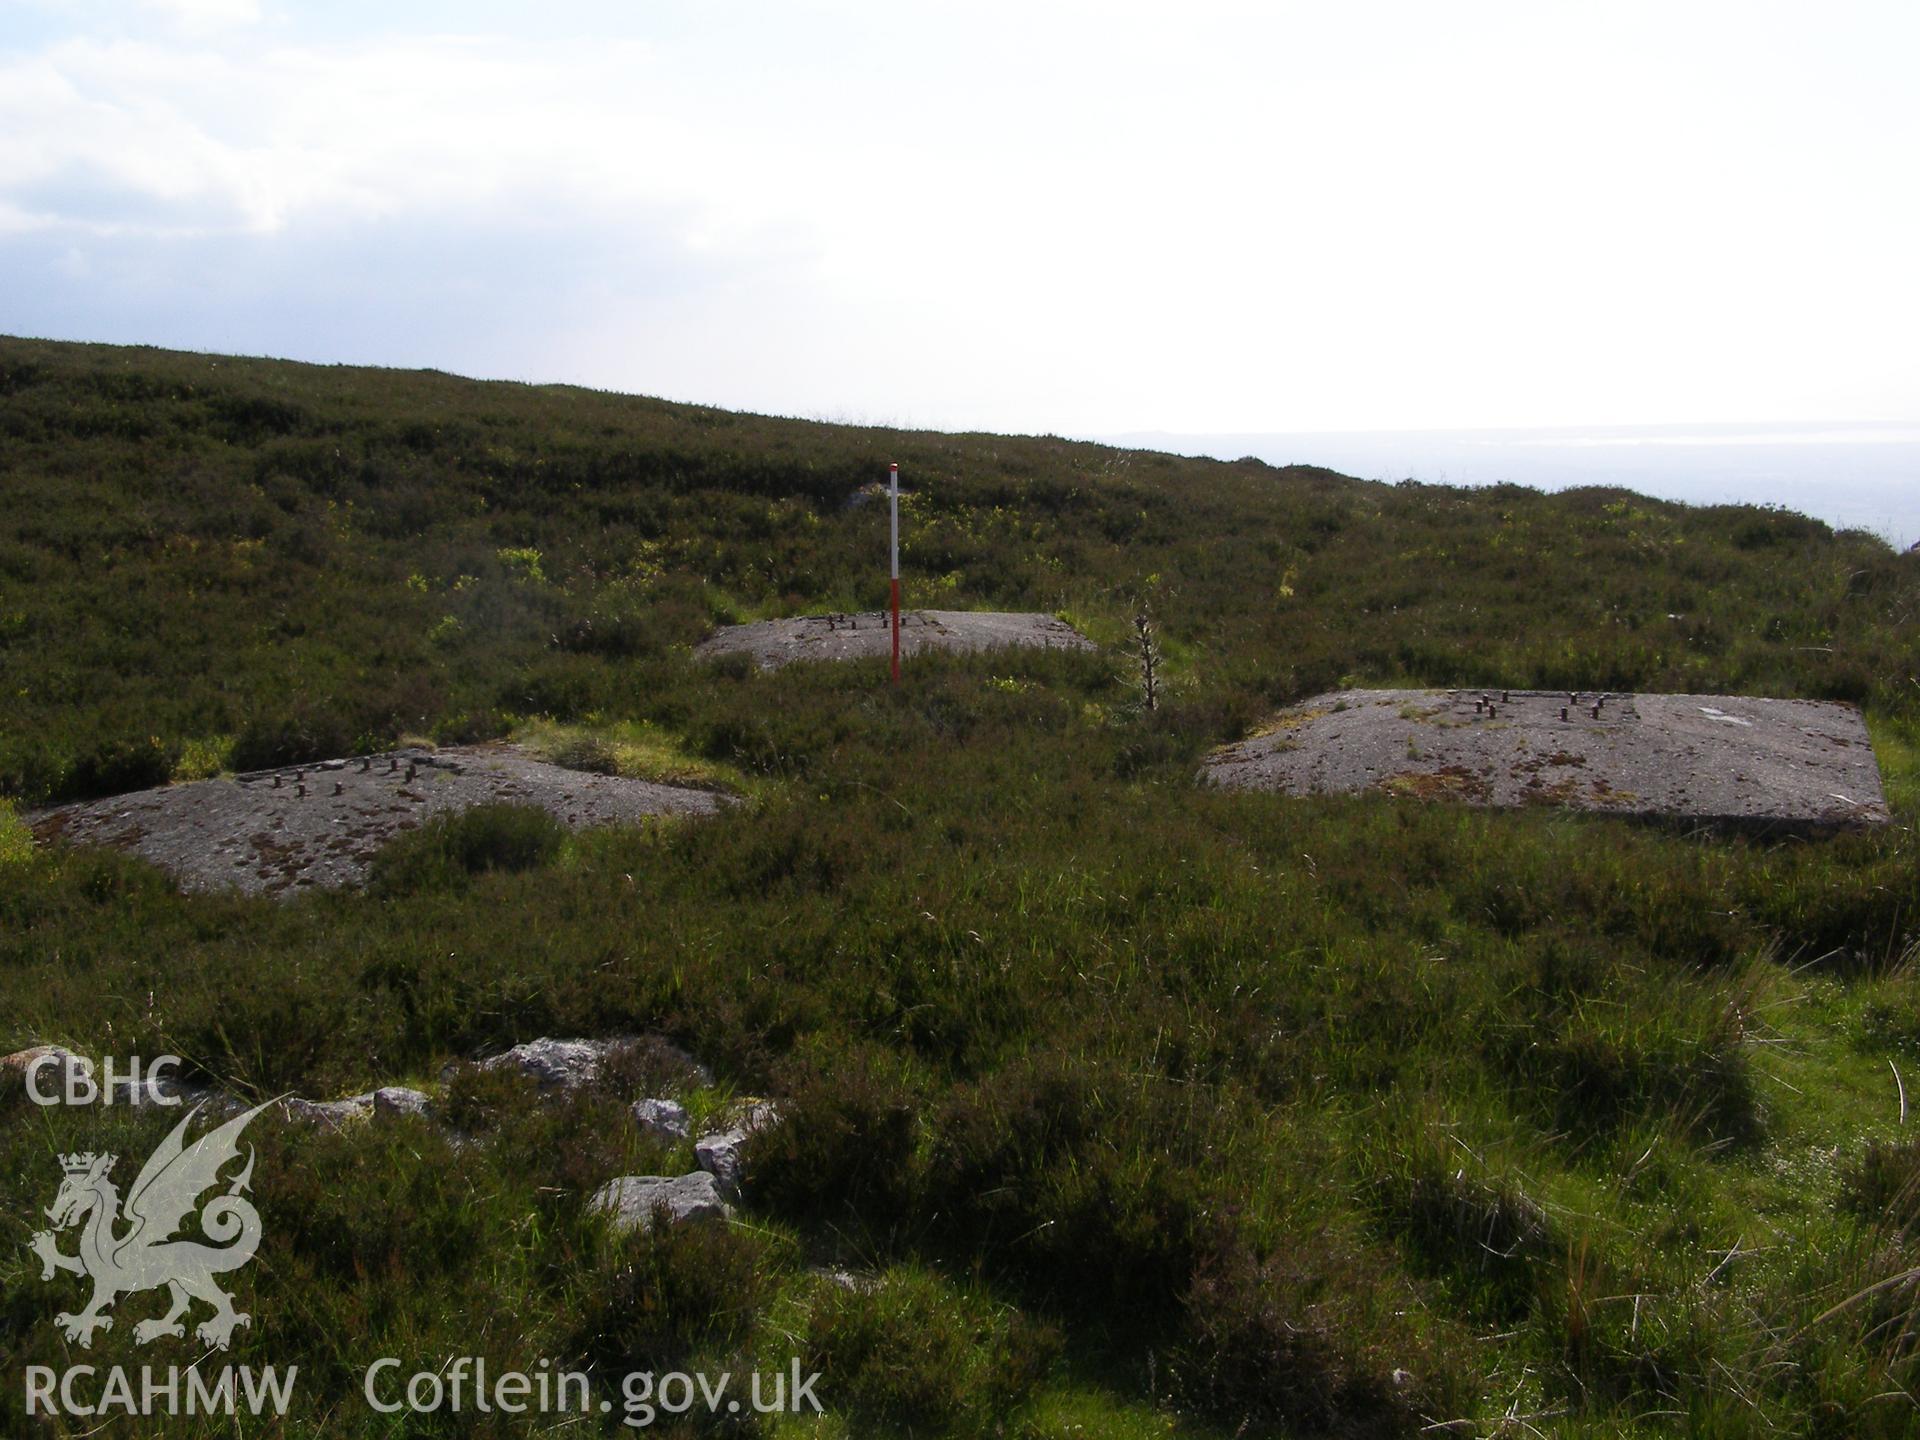 Digital colour photograph of Cefn Du Radio Station, concrete base IV taken on 07/06/2007 by P.J. Schofield during the Snowdon North West Upland Survey undertaken by Oxford Archaeology North.